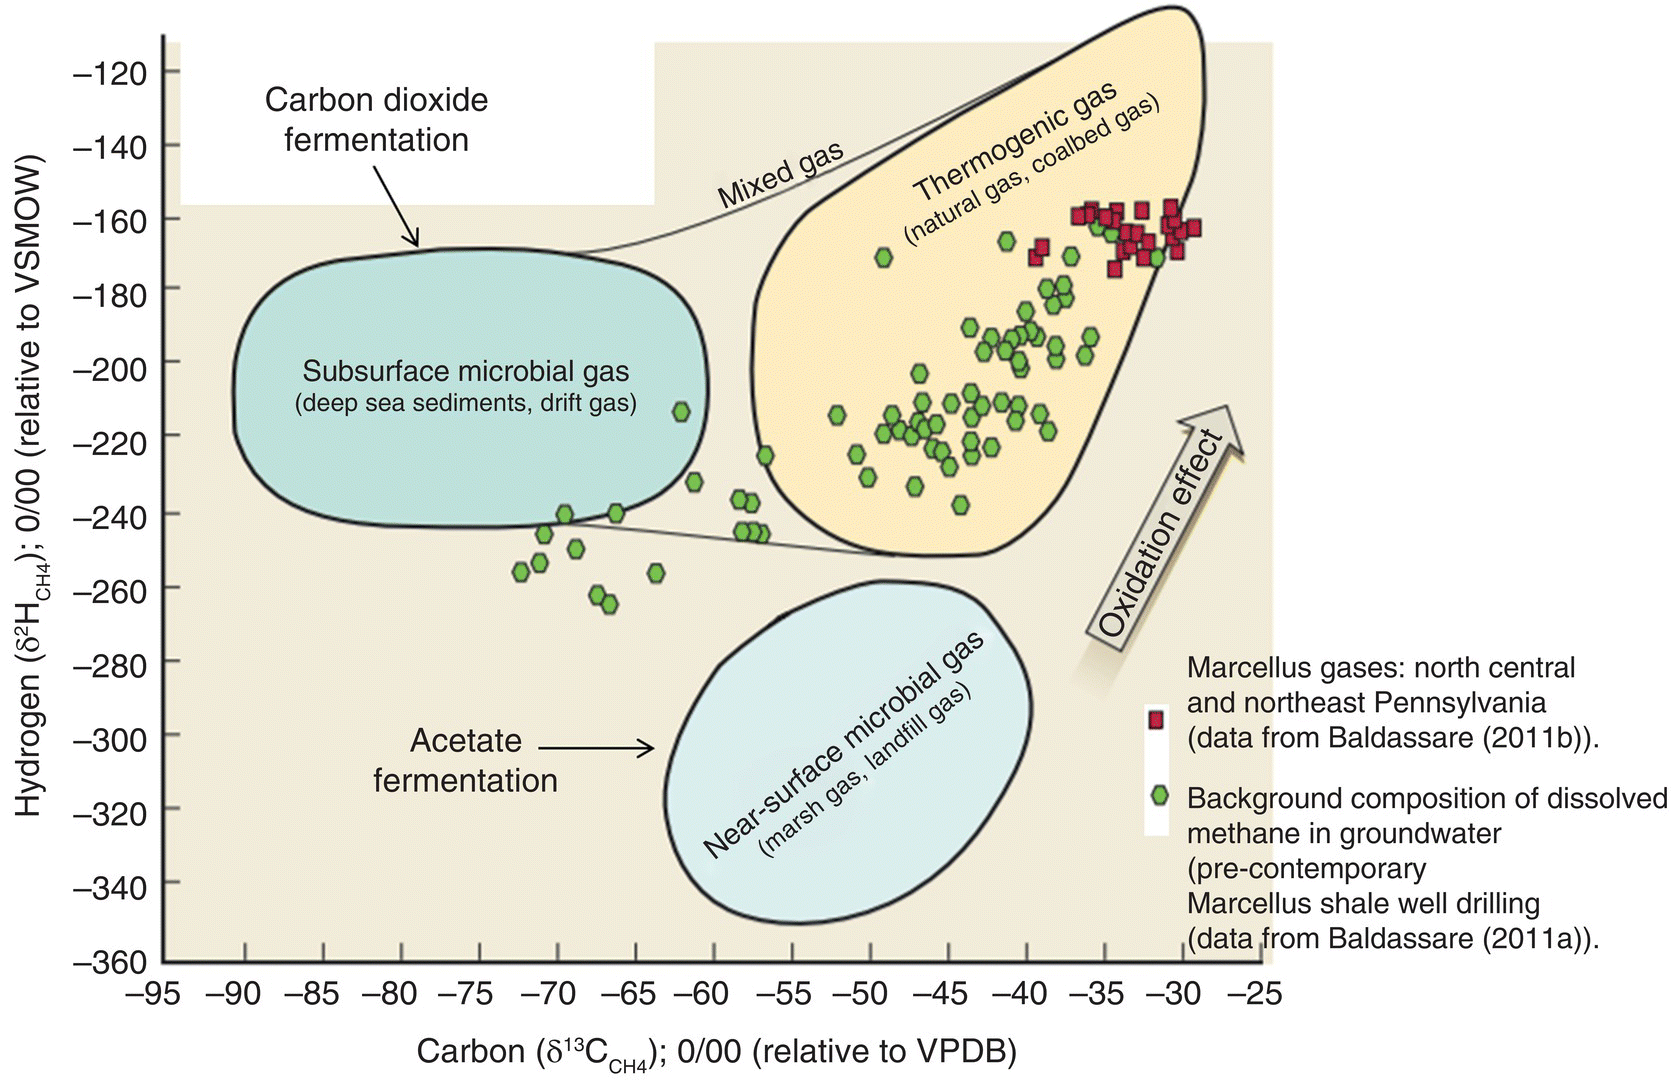 Graph of carbon vs. hydrogen isotopes displaying 3 closed shapes for subsurface microbial gas, near-surface microbial gas, and thermogenic gas with an ascending arrow labeled Oxidation effect.